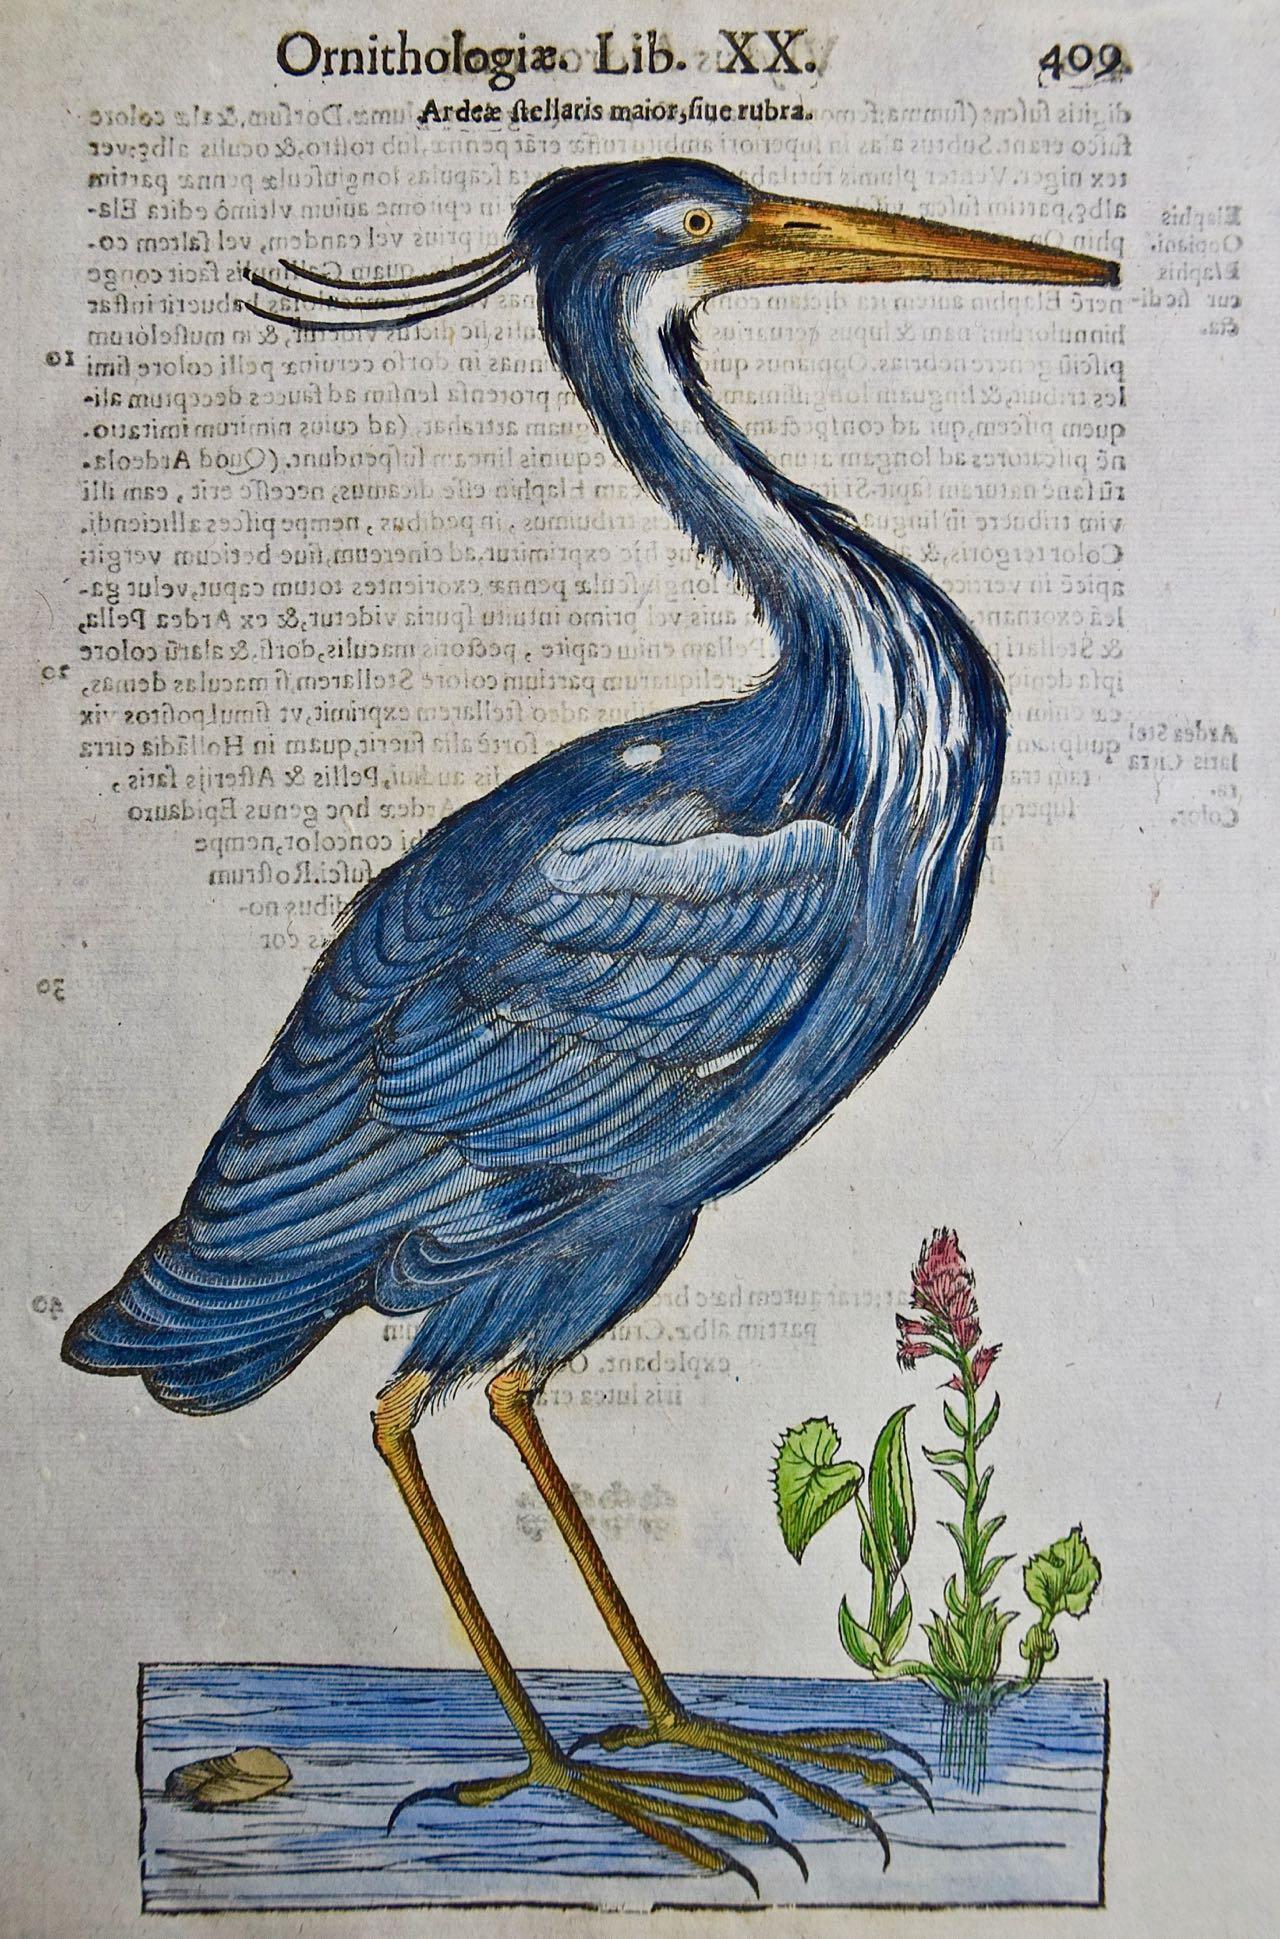 A 16th/17th Century Hand-colored Engraving of a Blue Heron Bird by Aldrovandi - Print by Ulisse Aldrovandi